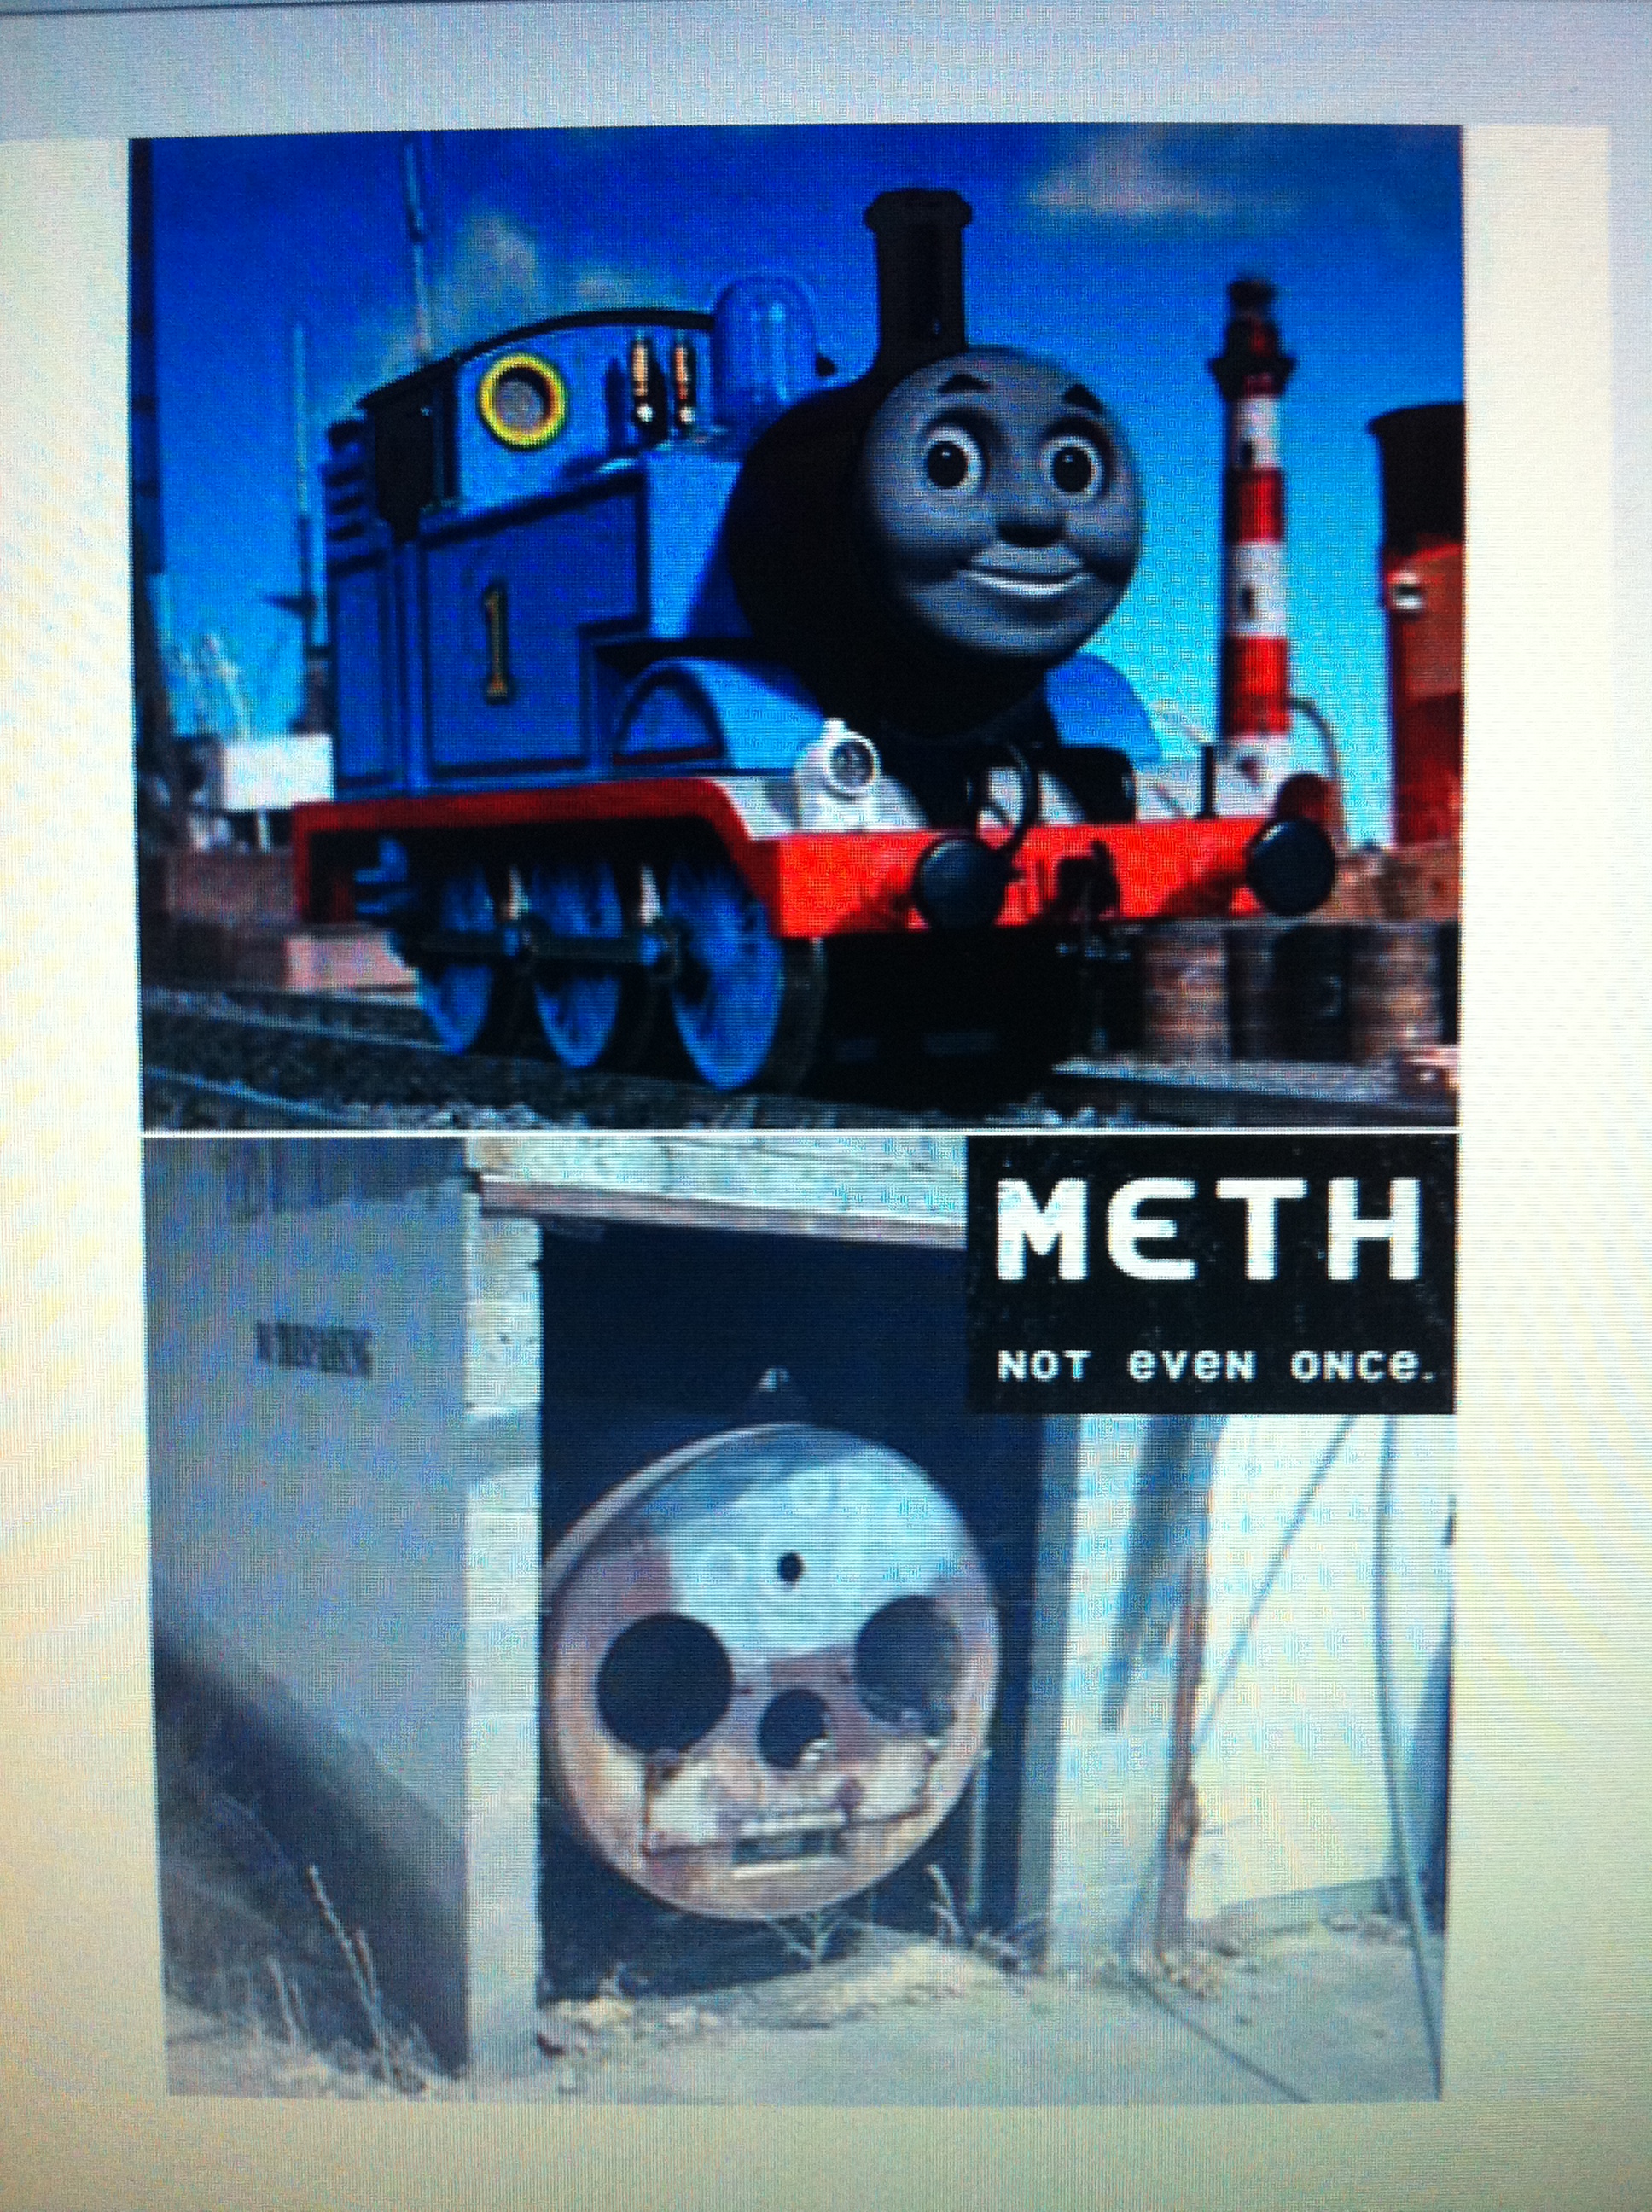 Shoe S. recomended thomas the tank